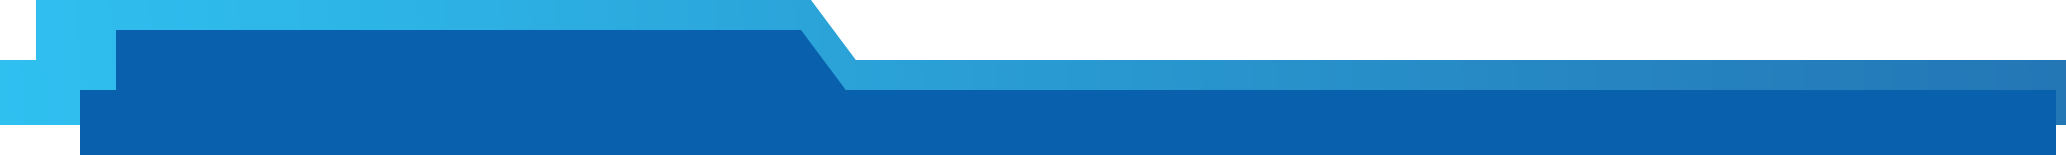 A blue and black logo with a blue background.